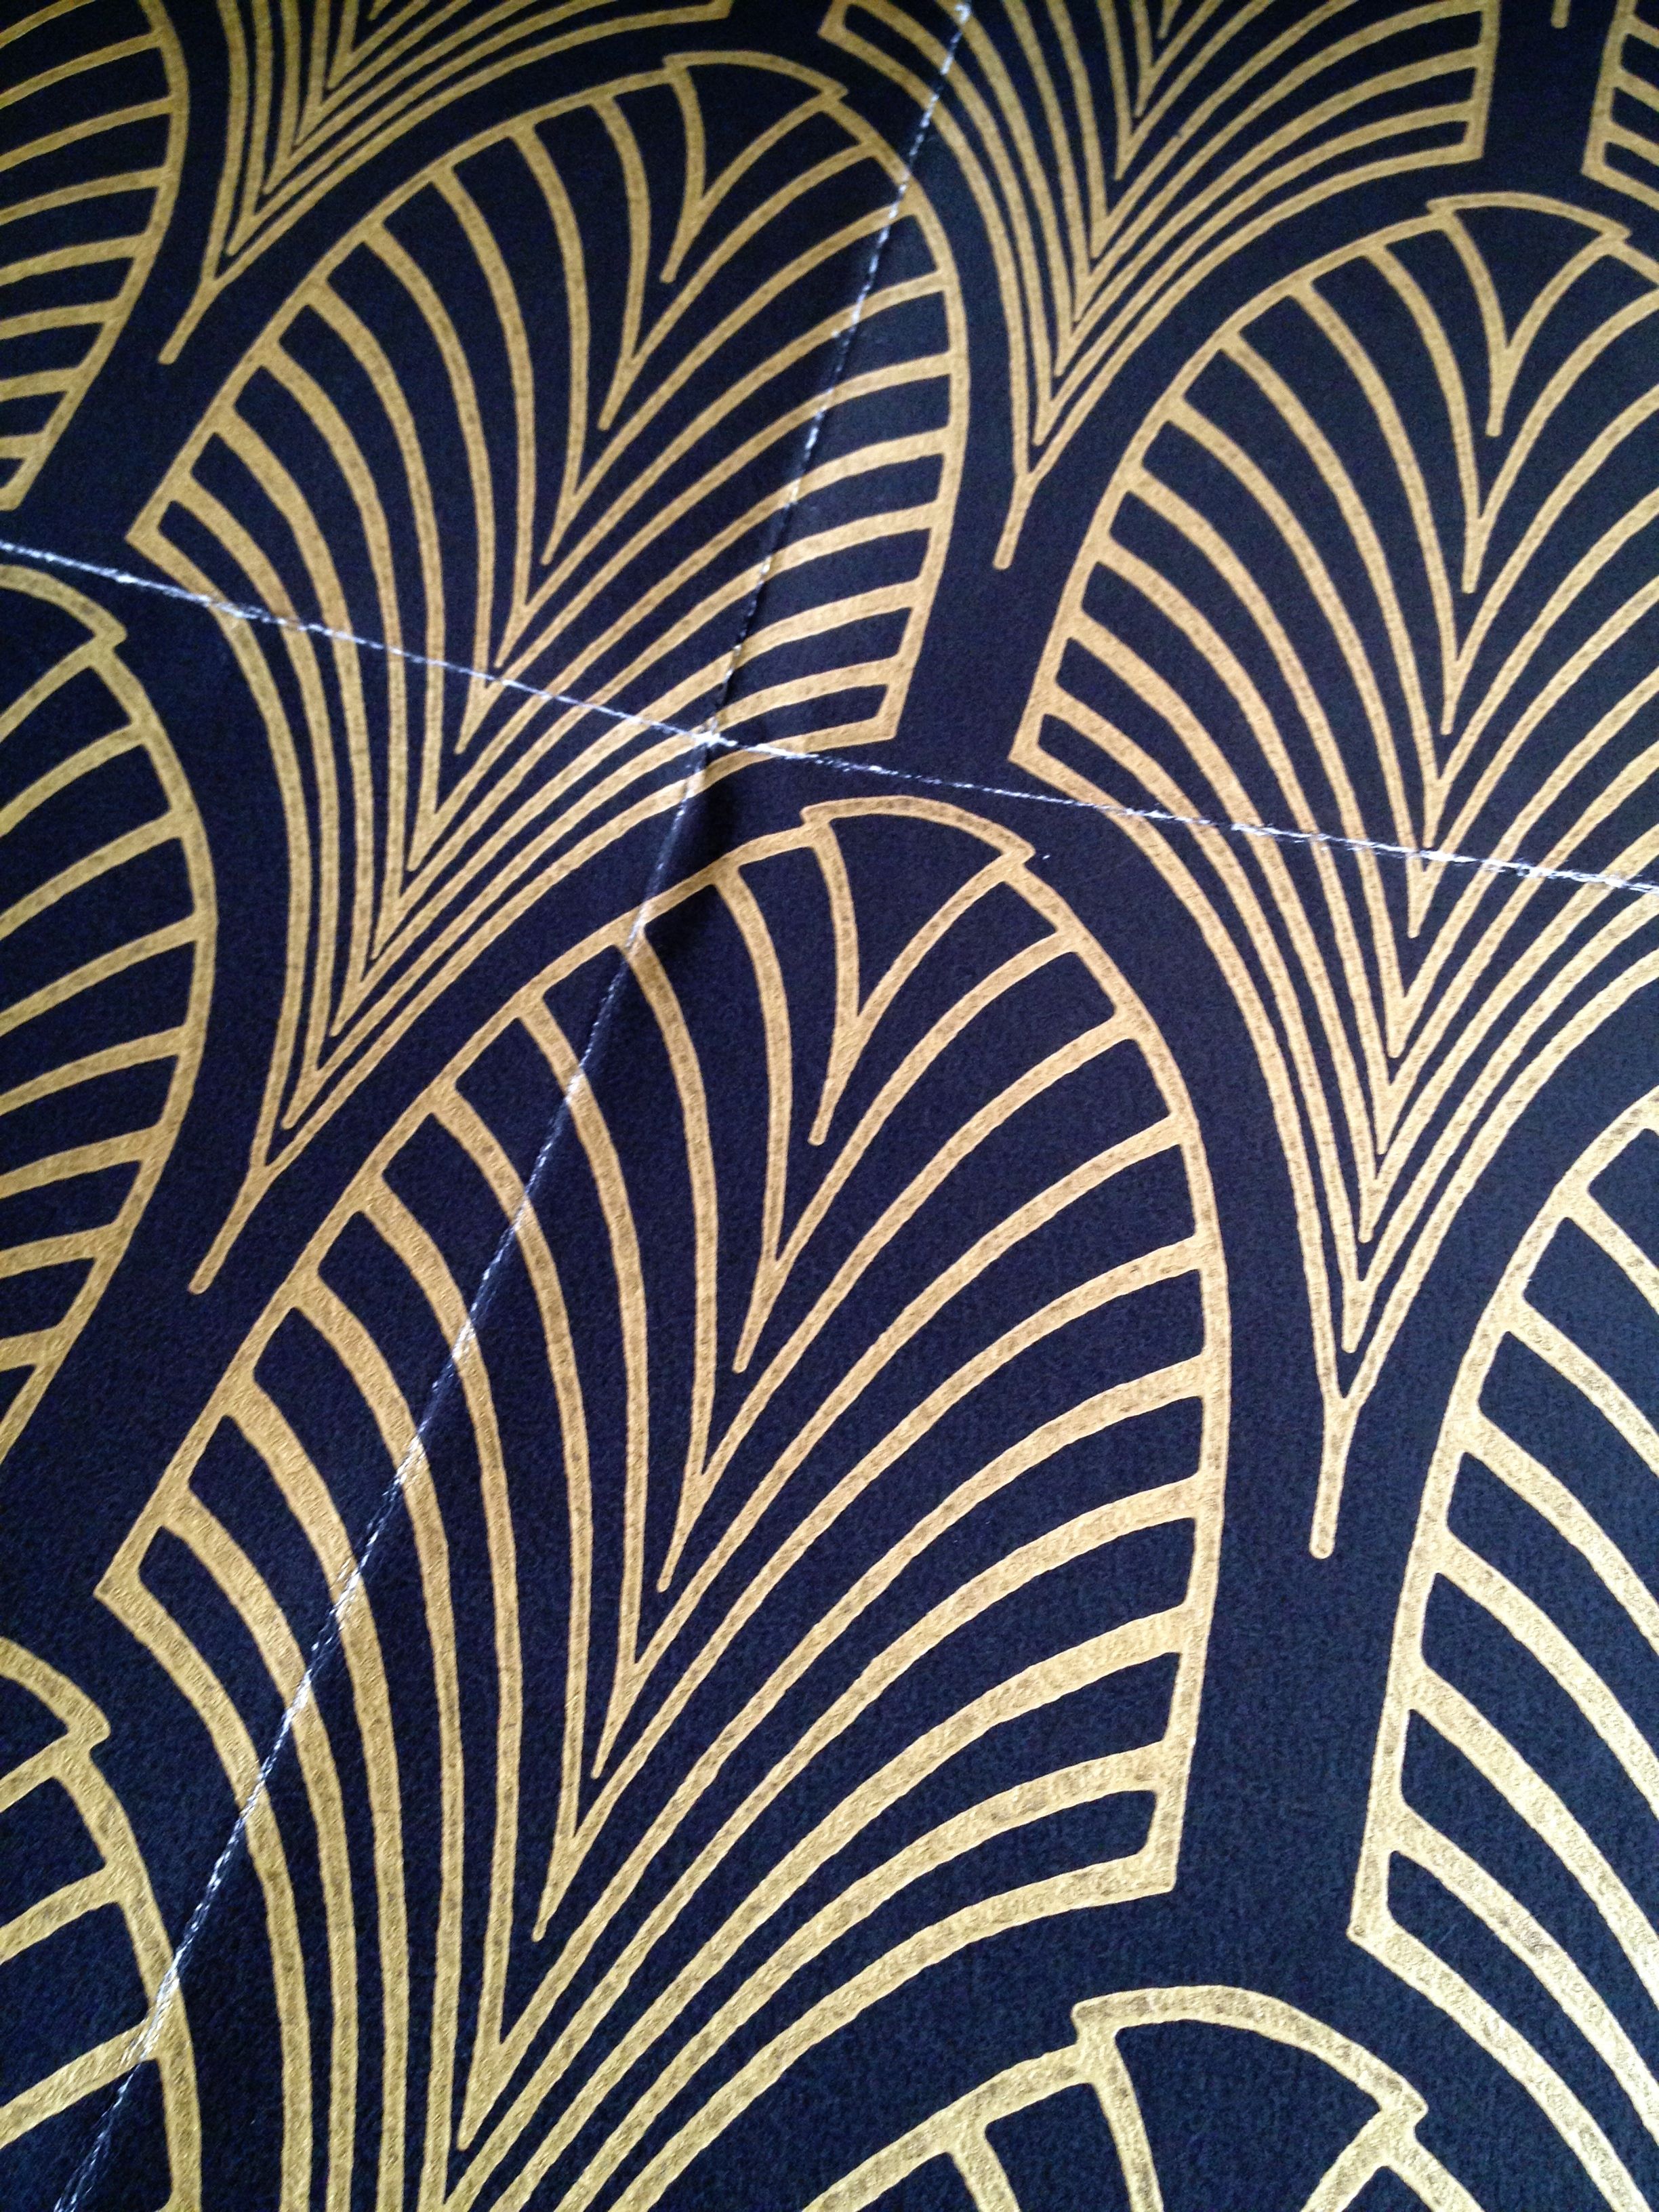 Black And Gold Art Deco Wallpaper From Cole & Son - Invitation For Gatsby Themed Party , HD Wallpaper & Backgrounds